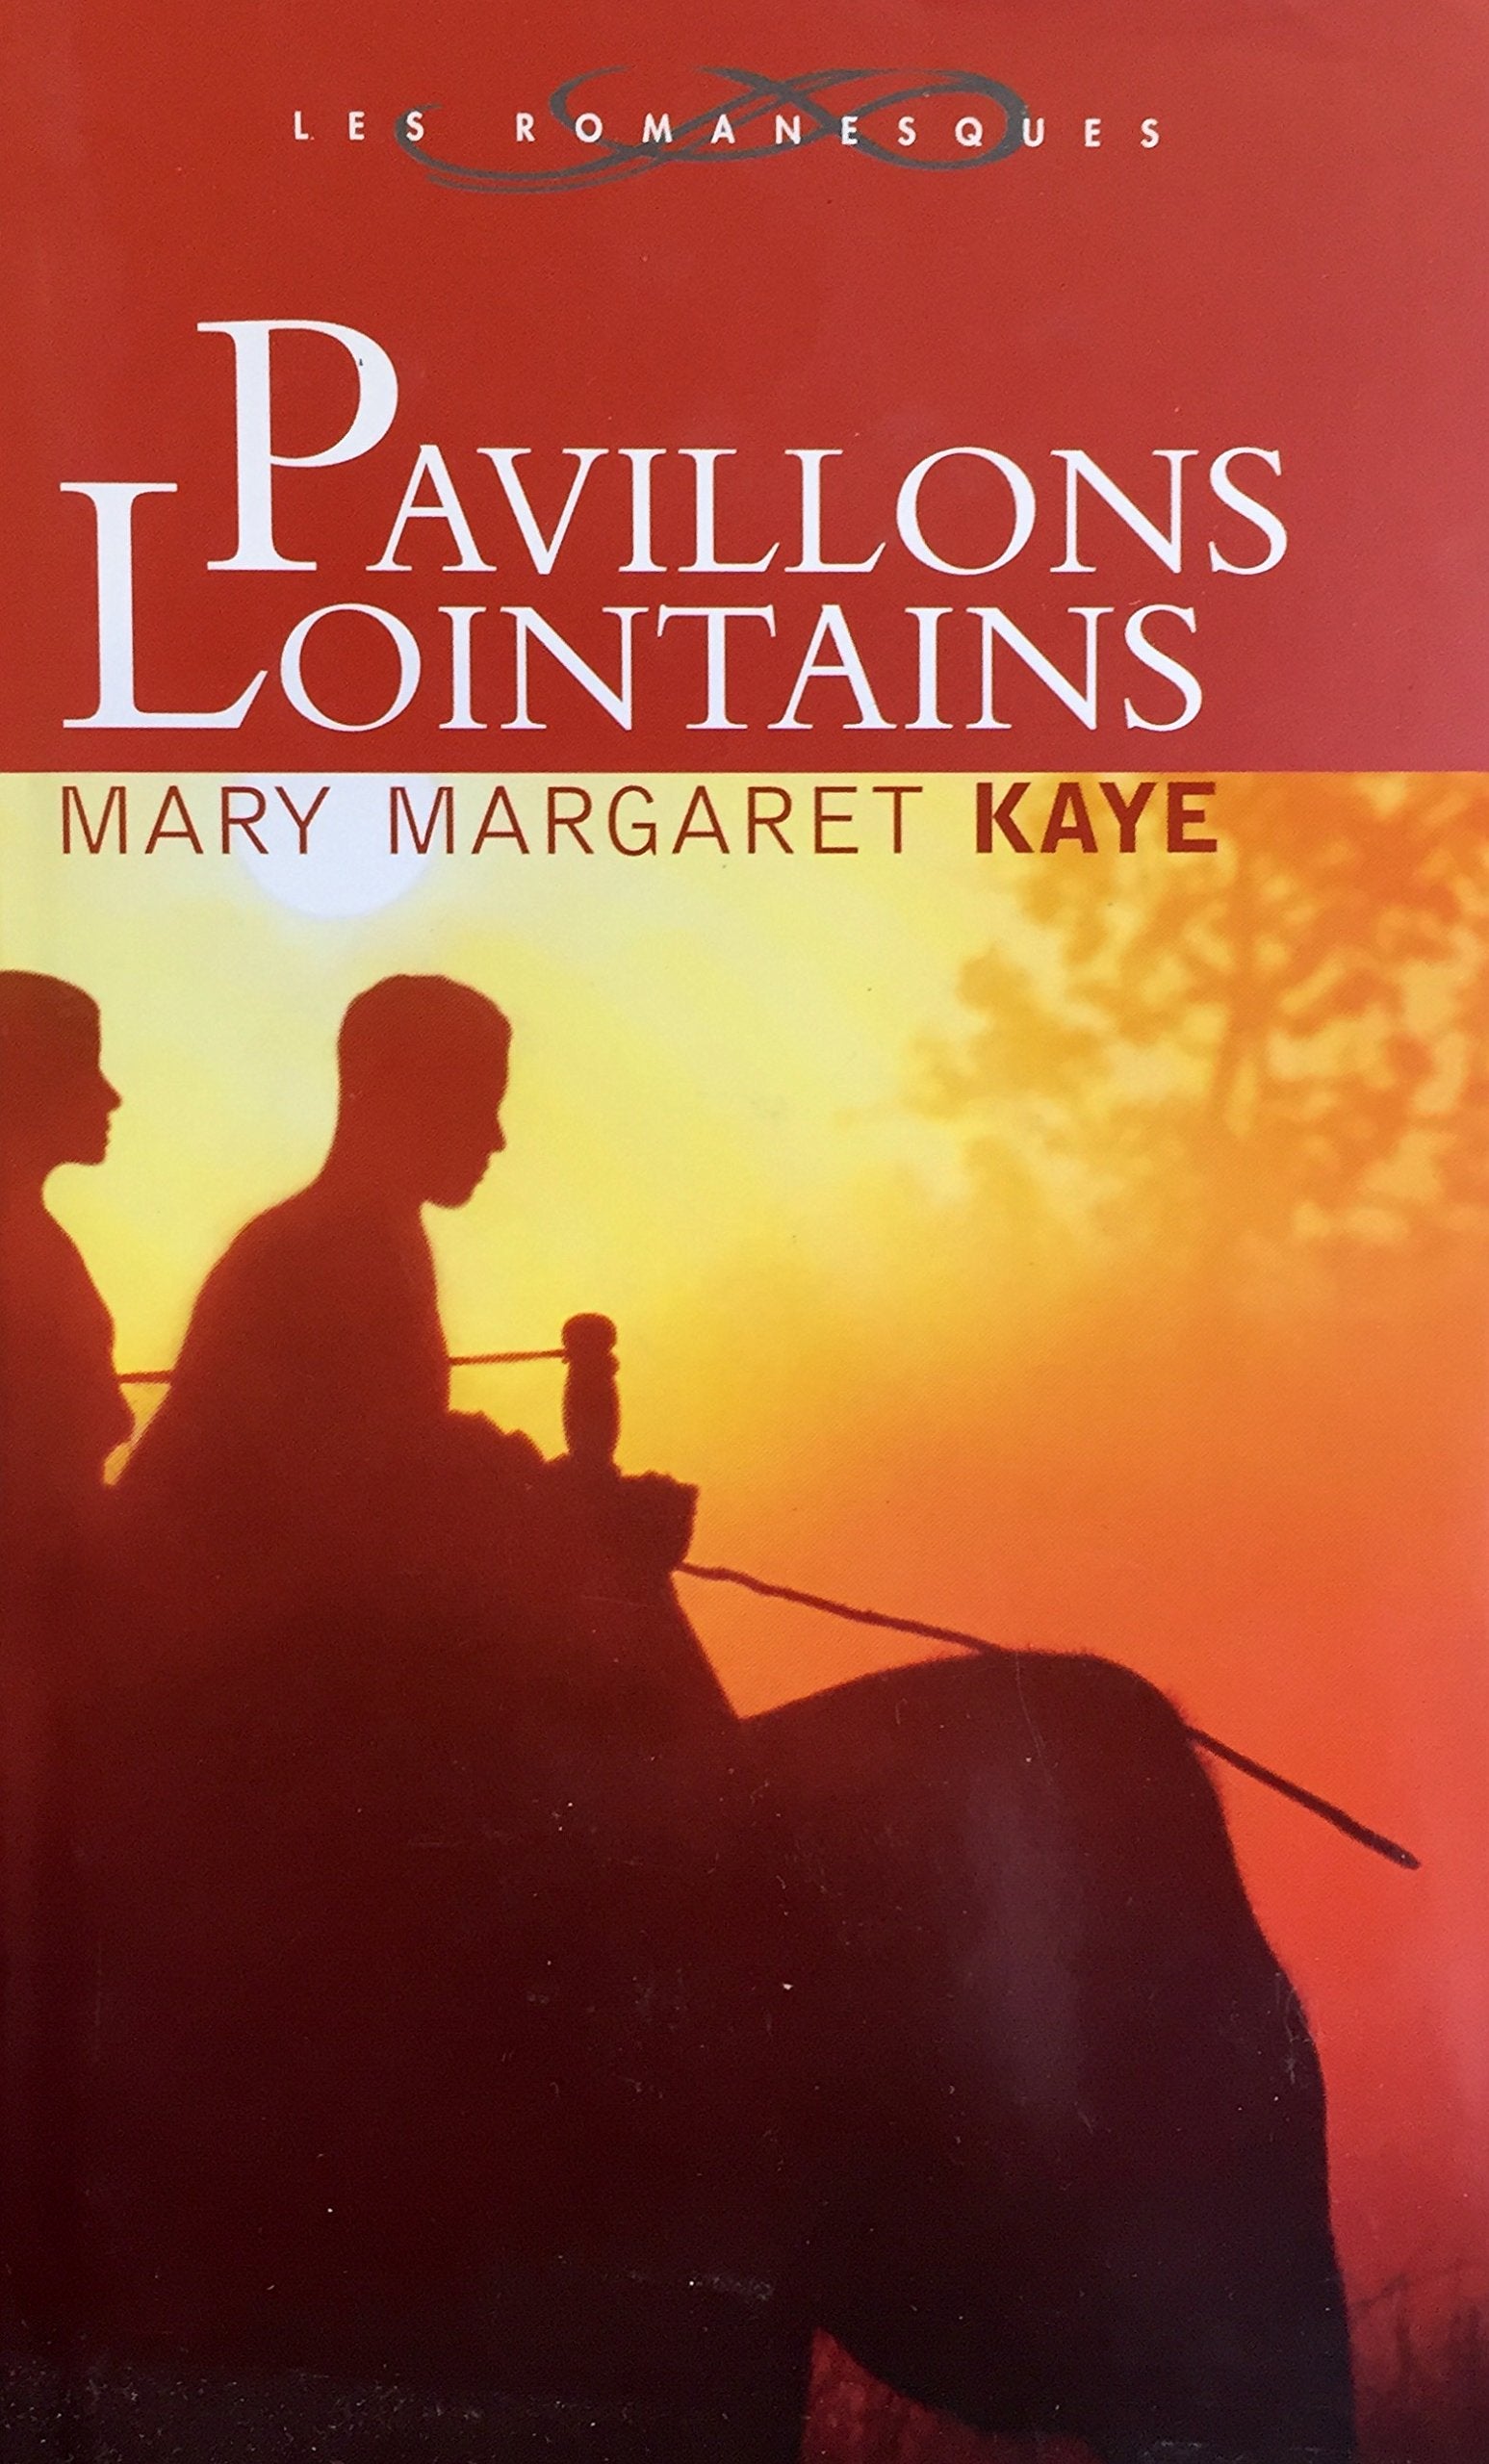 Les Romanesques : Pavillons lointains - Mary Margaret Kaye